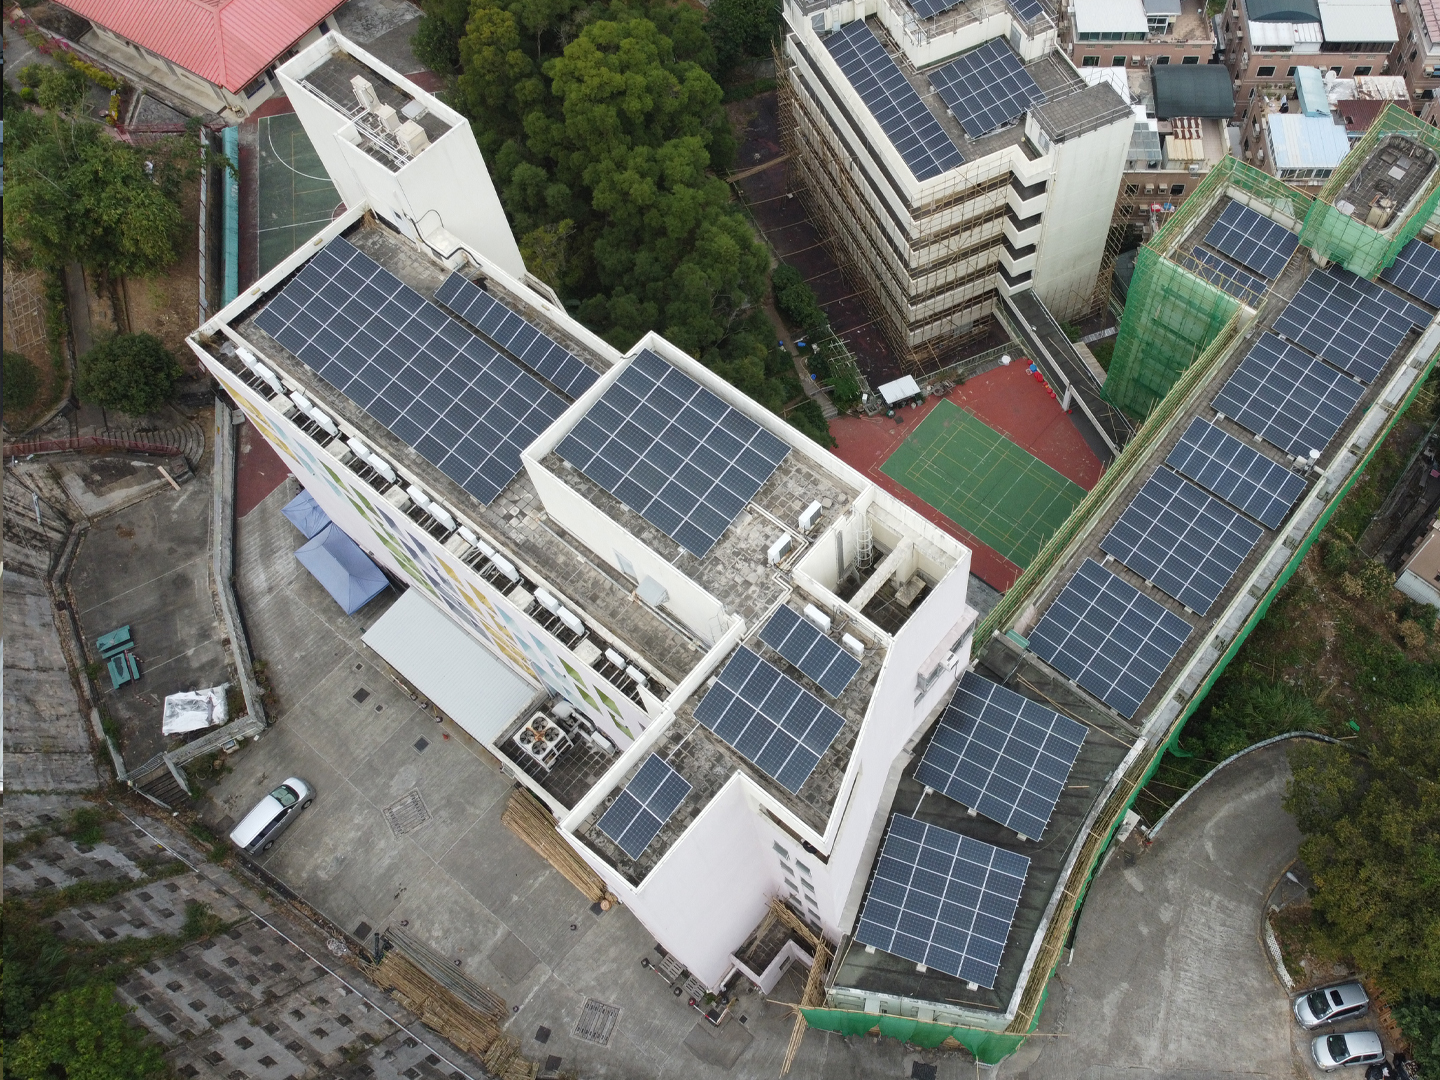 The 130 kW solar system of a school